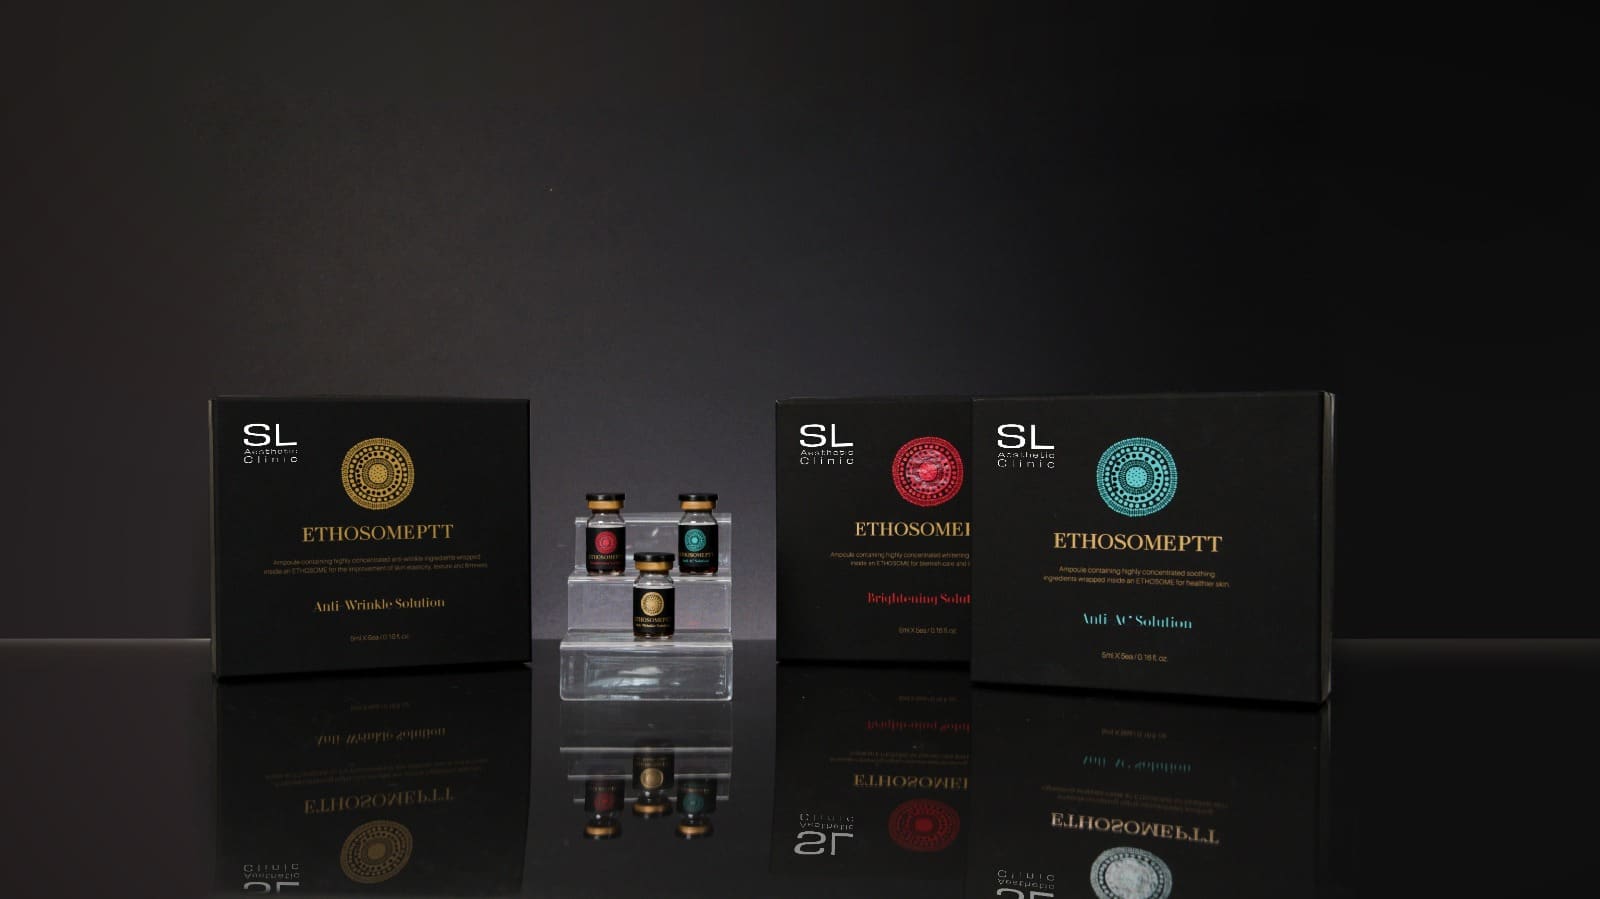 3rd Generation Ethosome Gold PTT skincare product line: an image featuring three products - Anti-Wrinkle Solution, Brightening Solution, and Anti-Acne Solution - formulated with 3rd Generation Ethosome Gold PTT technology for enhanced efficacy, deep skin penetration, and targeted results.